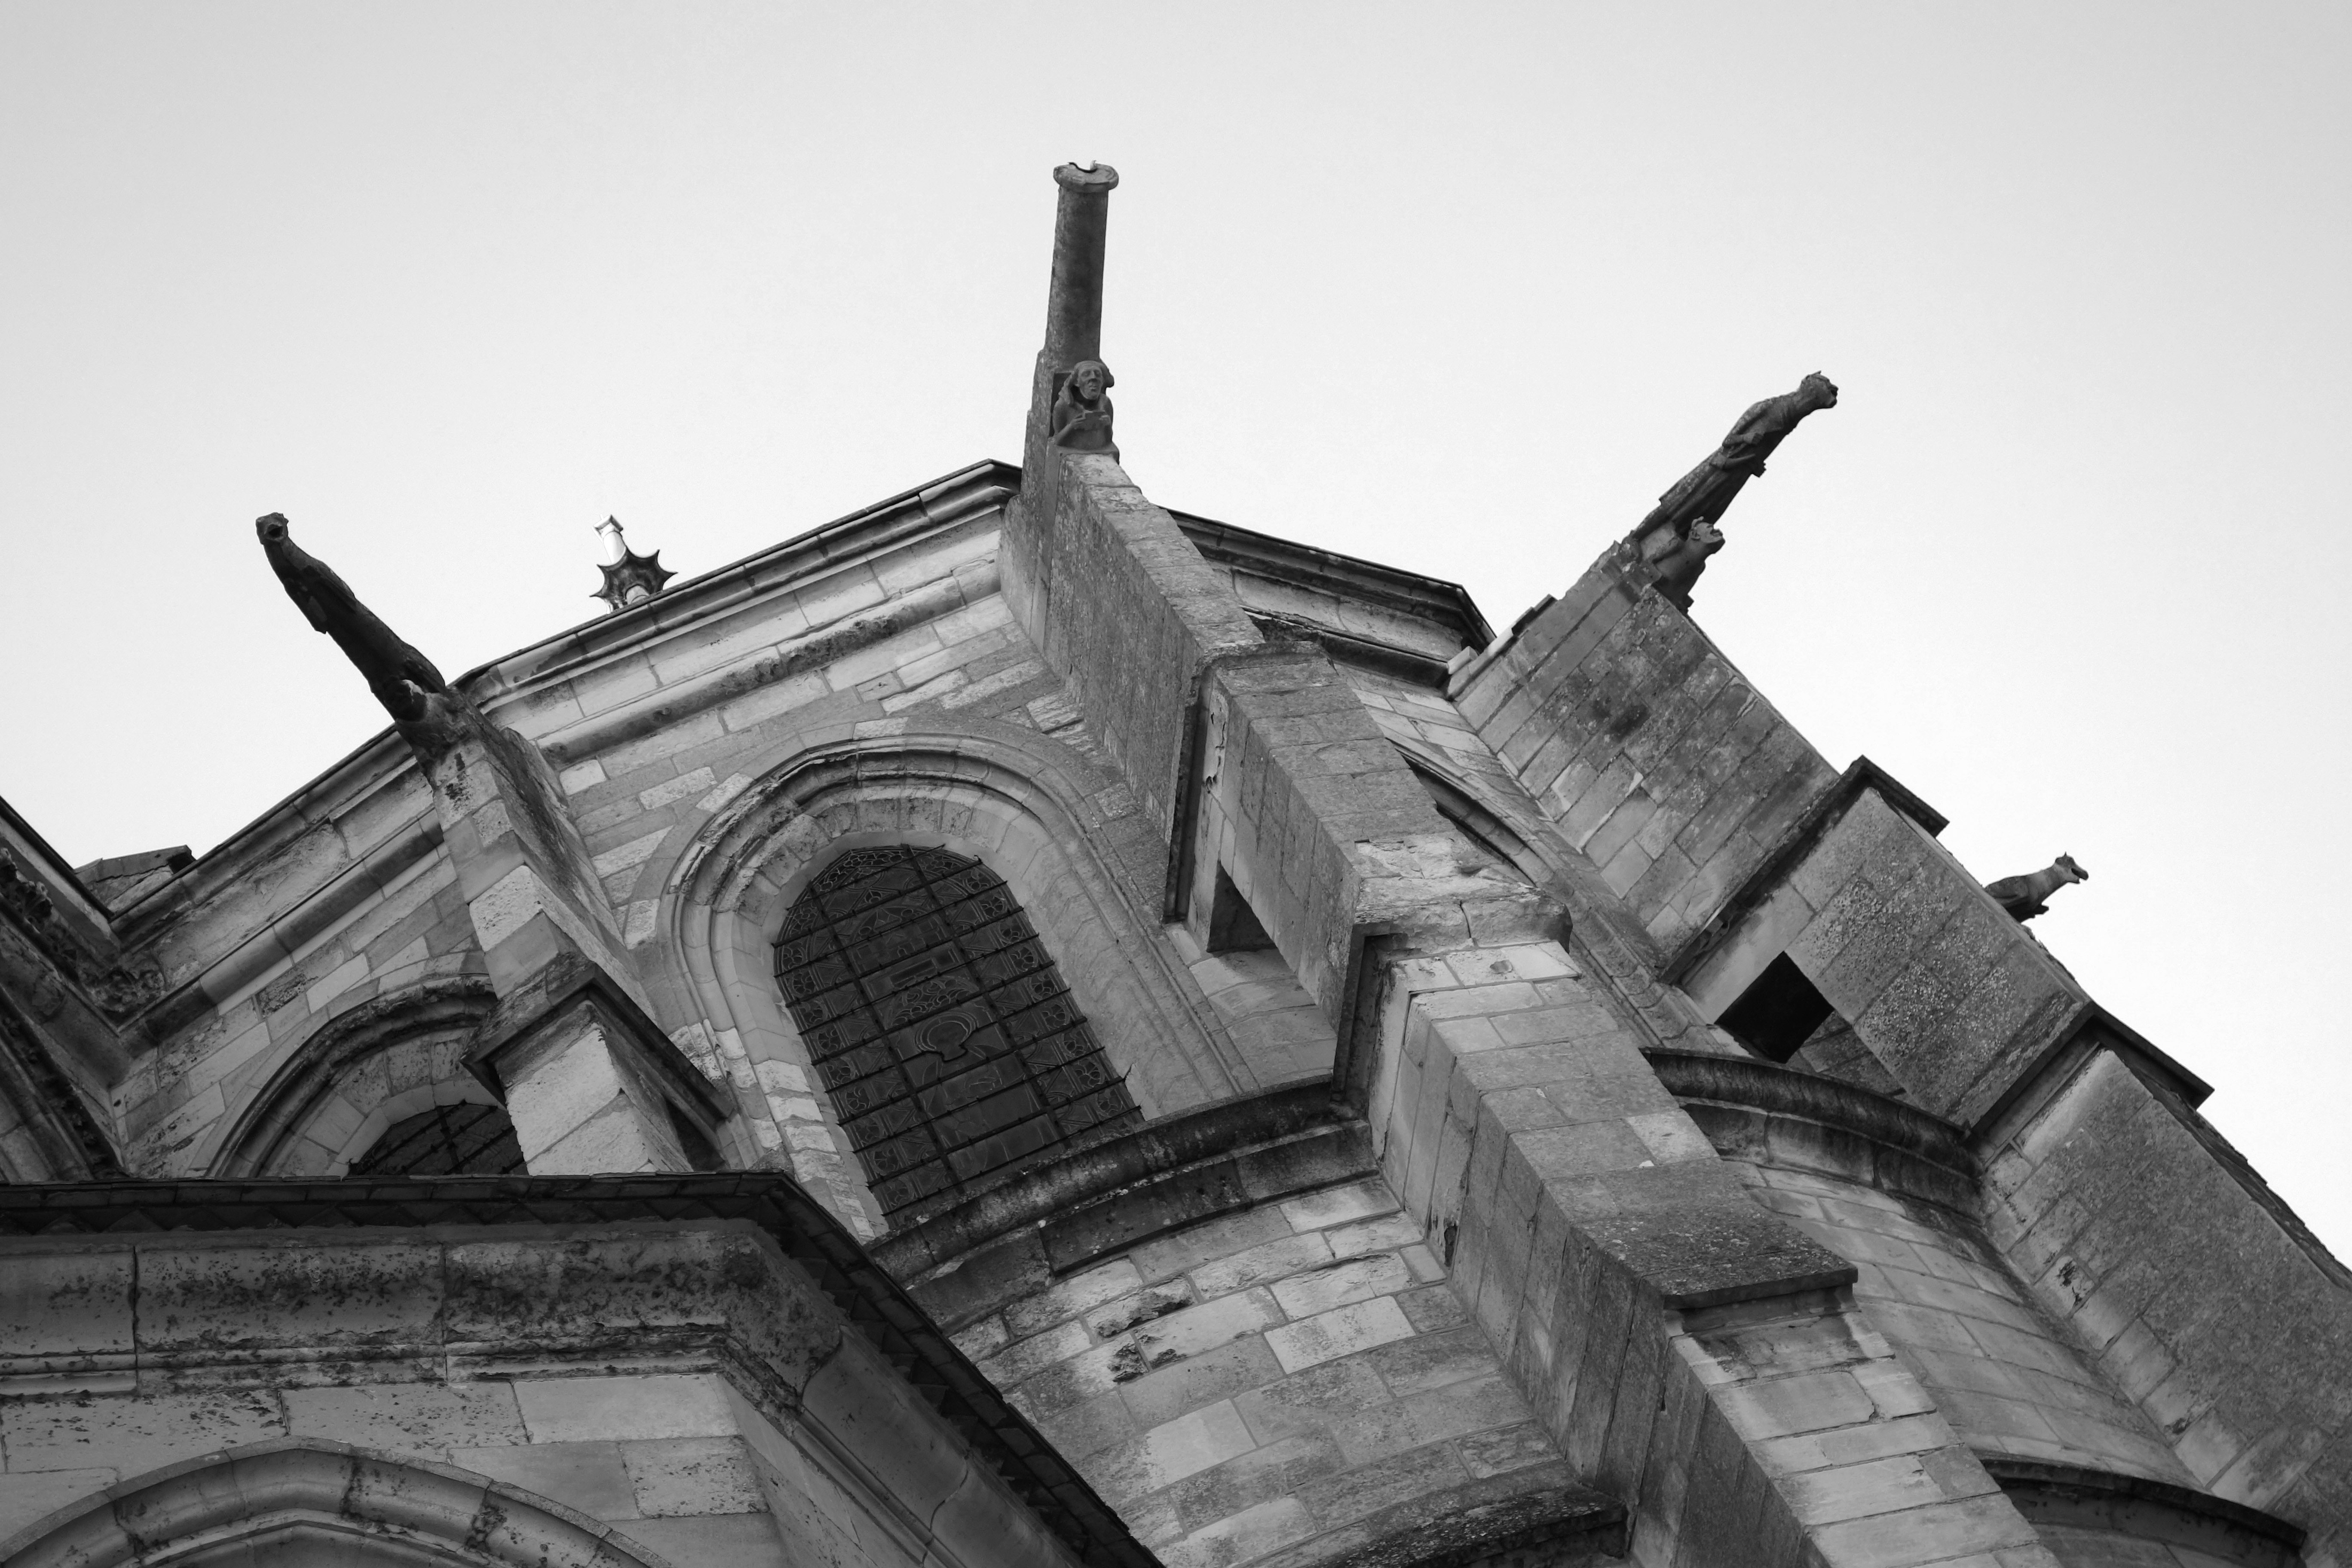 General 5472x3648 gray building worm's eye view church stones architecture low-angle monochrome